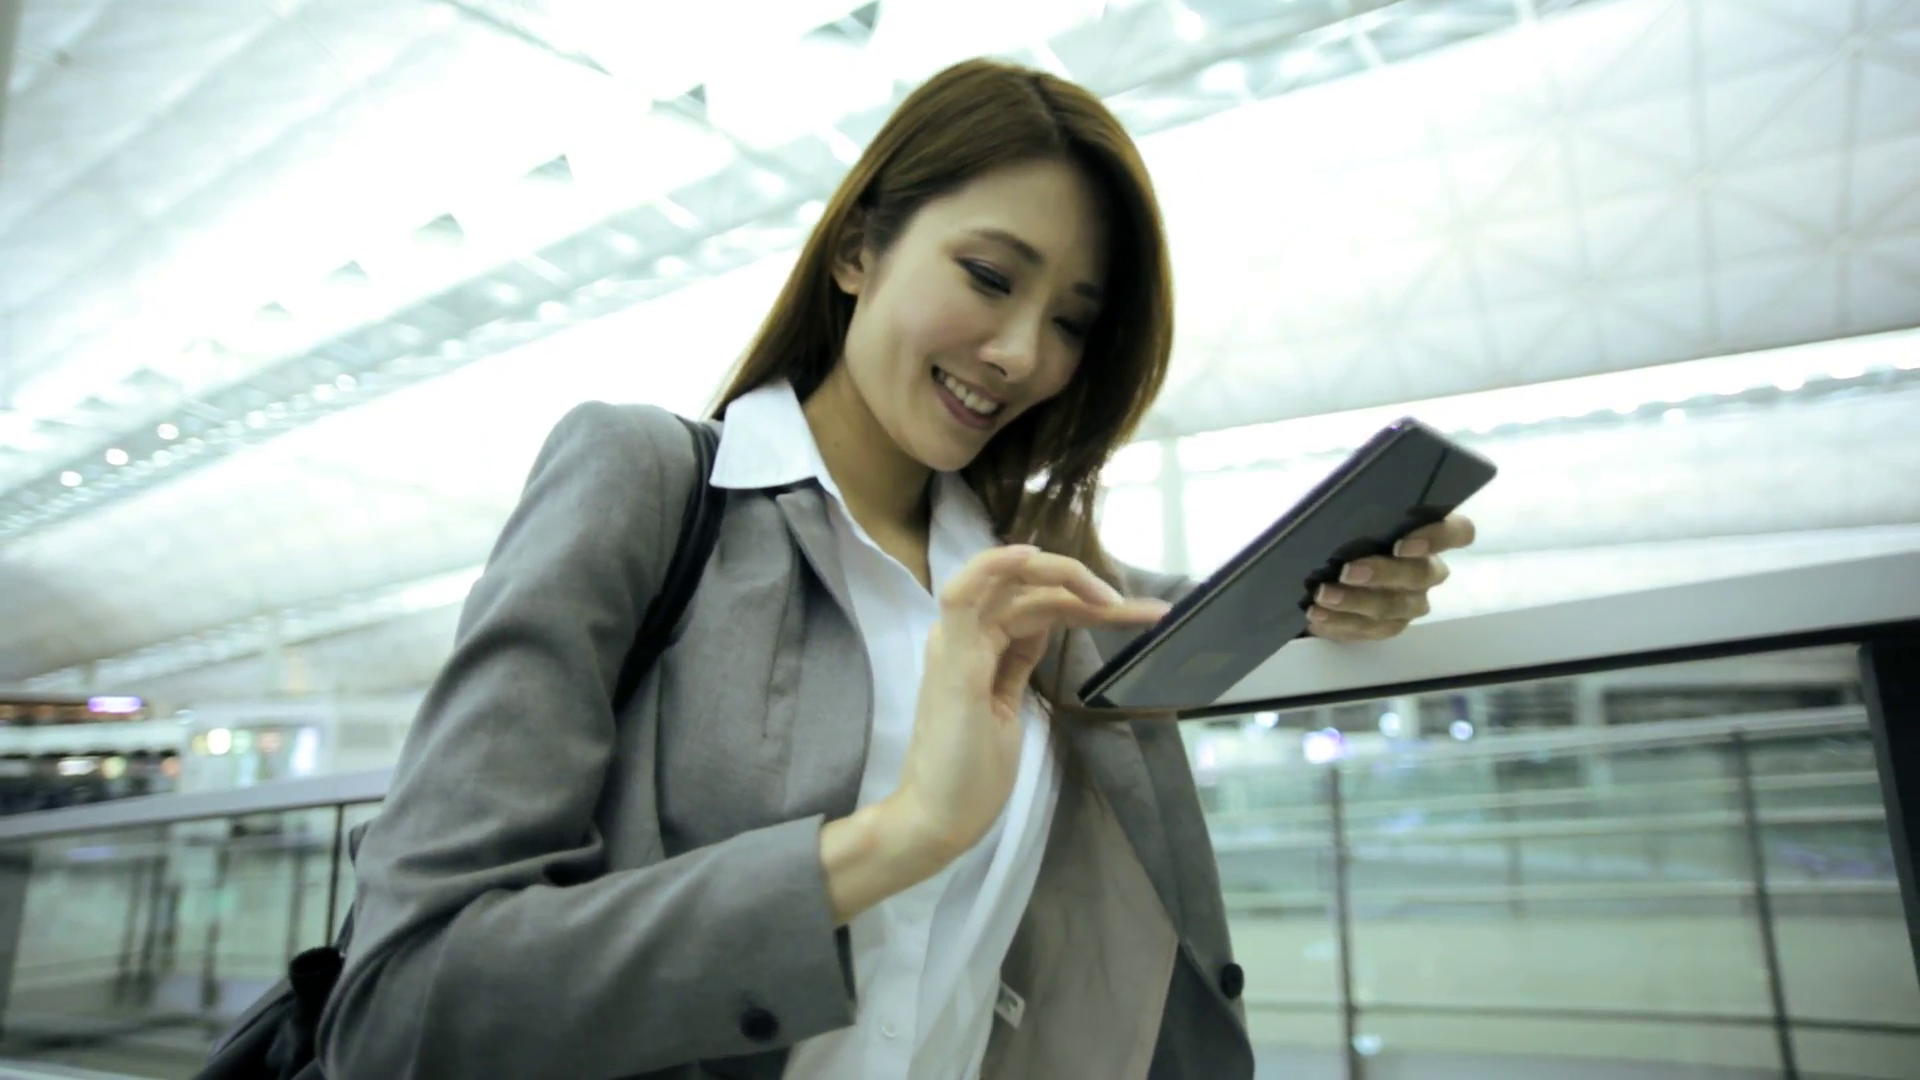 Smart Businesswoman traveling - accounting apps for business travellers